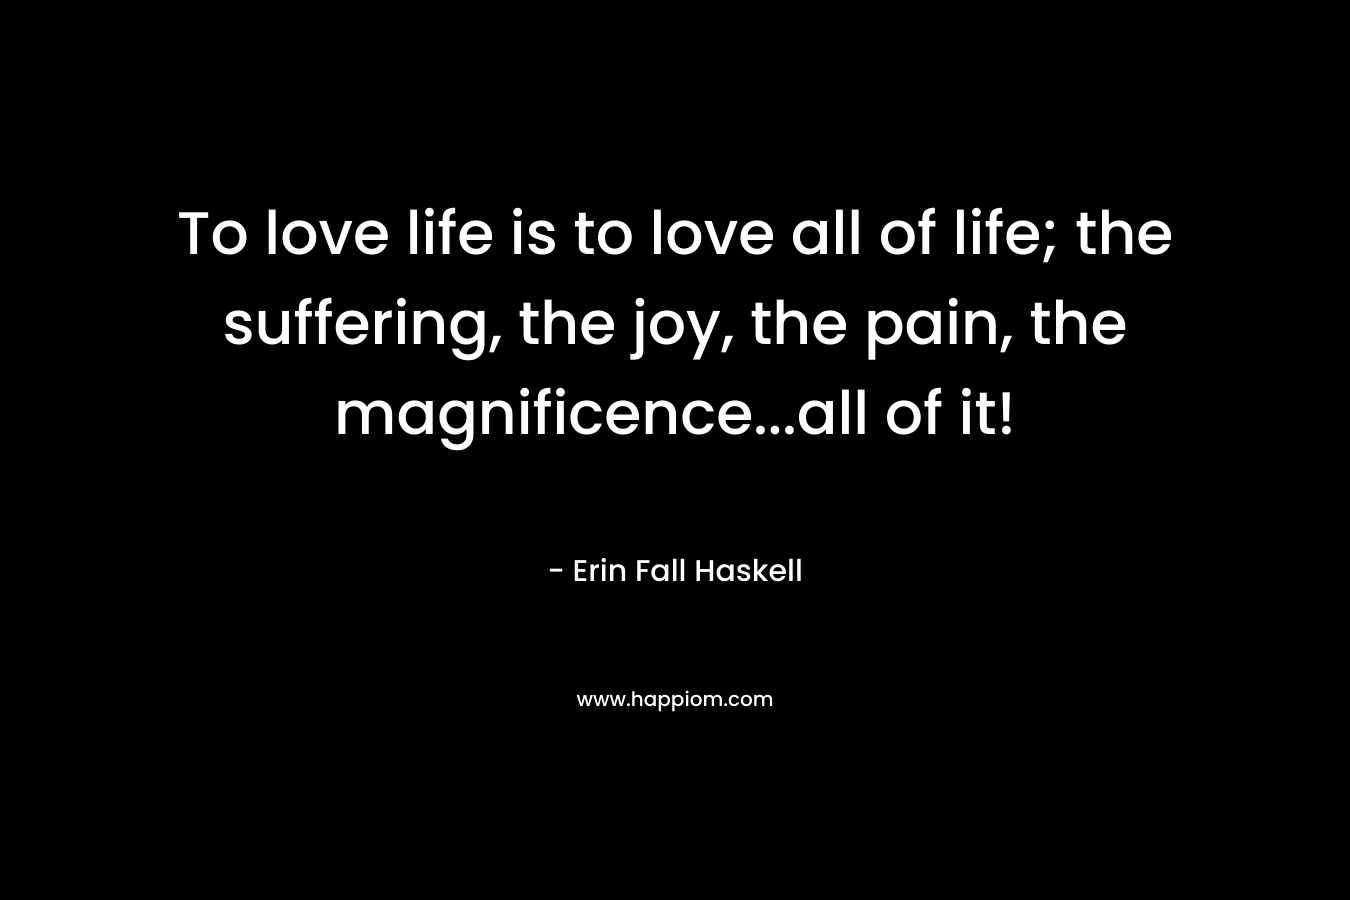 To love life is to love all of life; the suffering, the joy, the pain, the magnificence…all of it! – Erin Fall Haskell